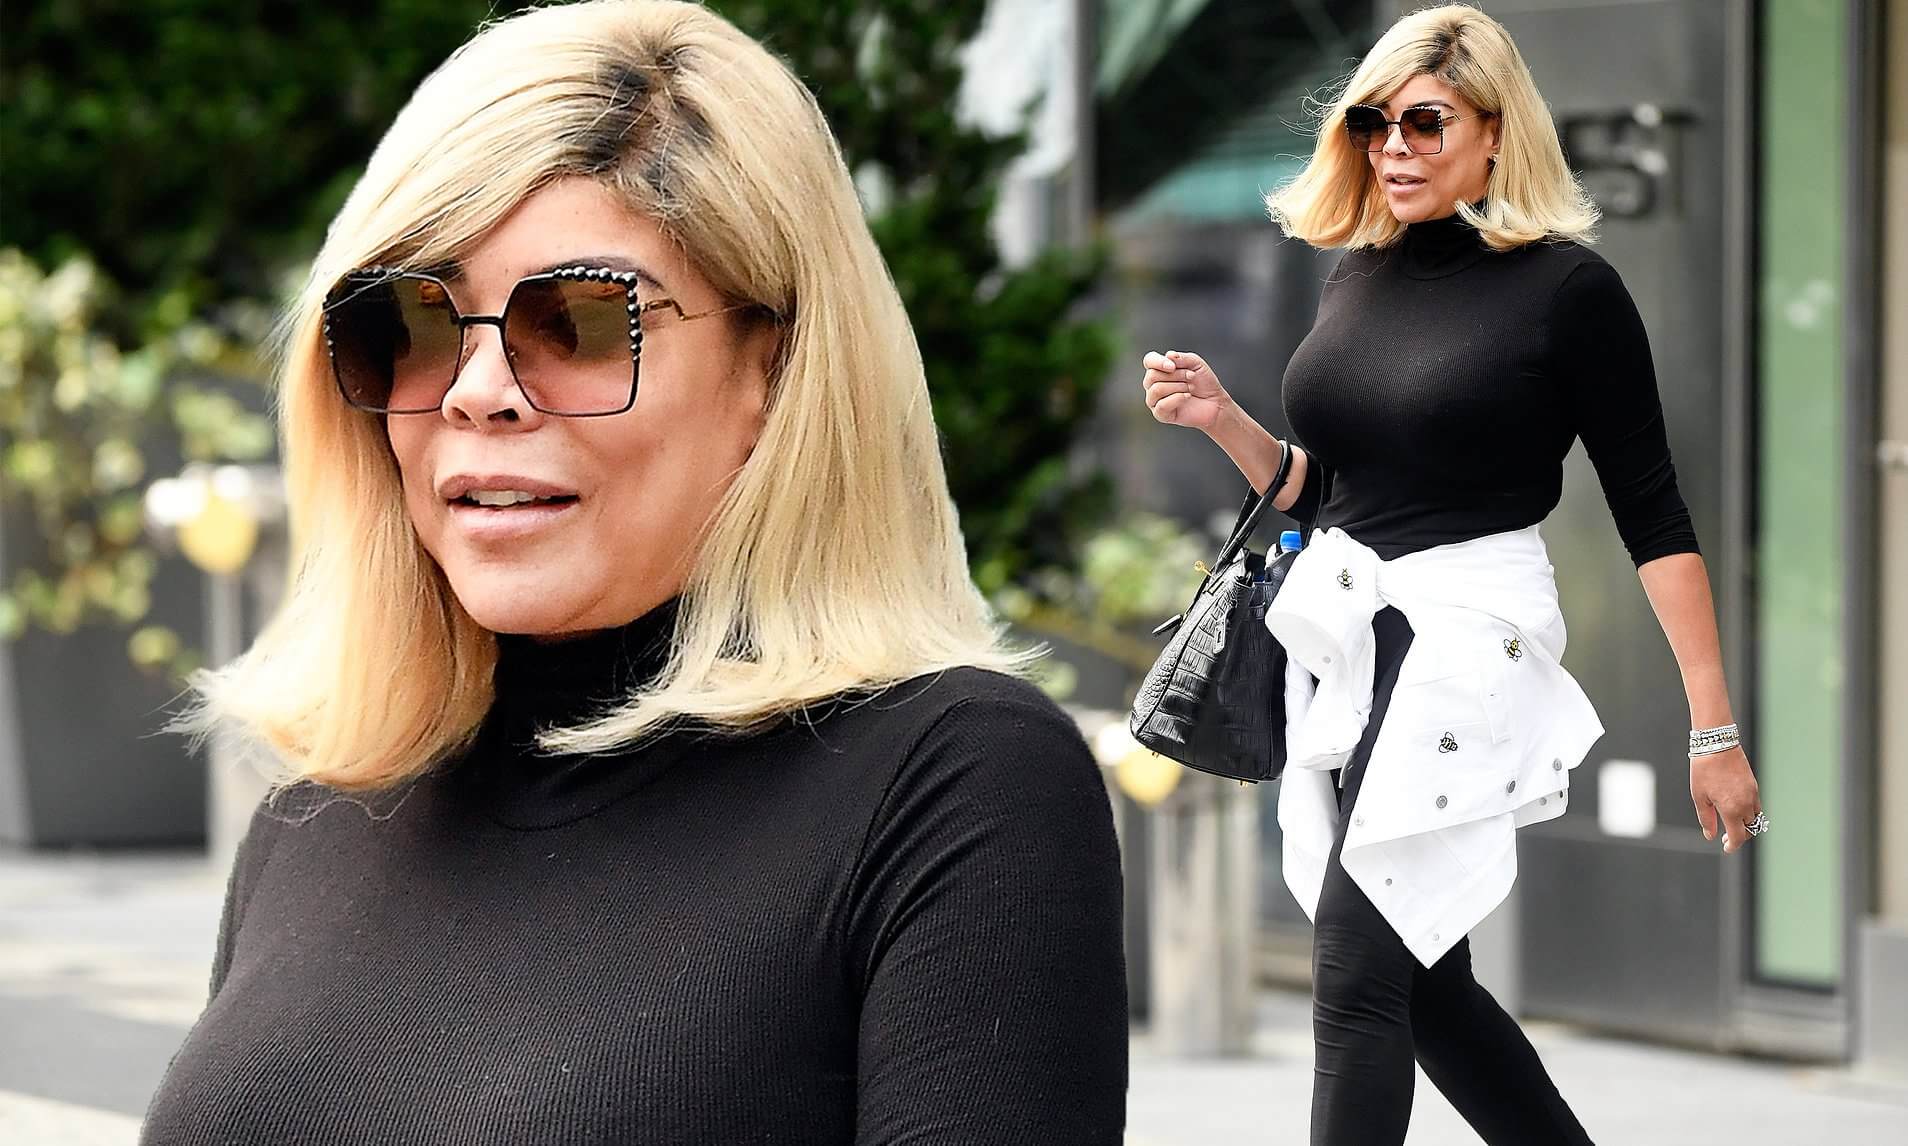 SKIN BLEACHING……Wendy Williams Slams Fans Accusing Her Family of Looking ‘White’ In Old Photos!